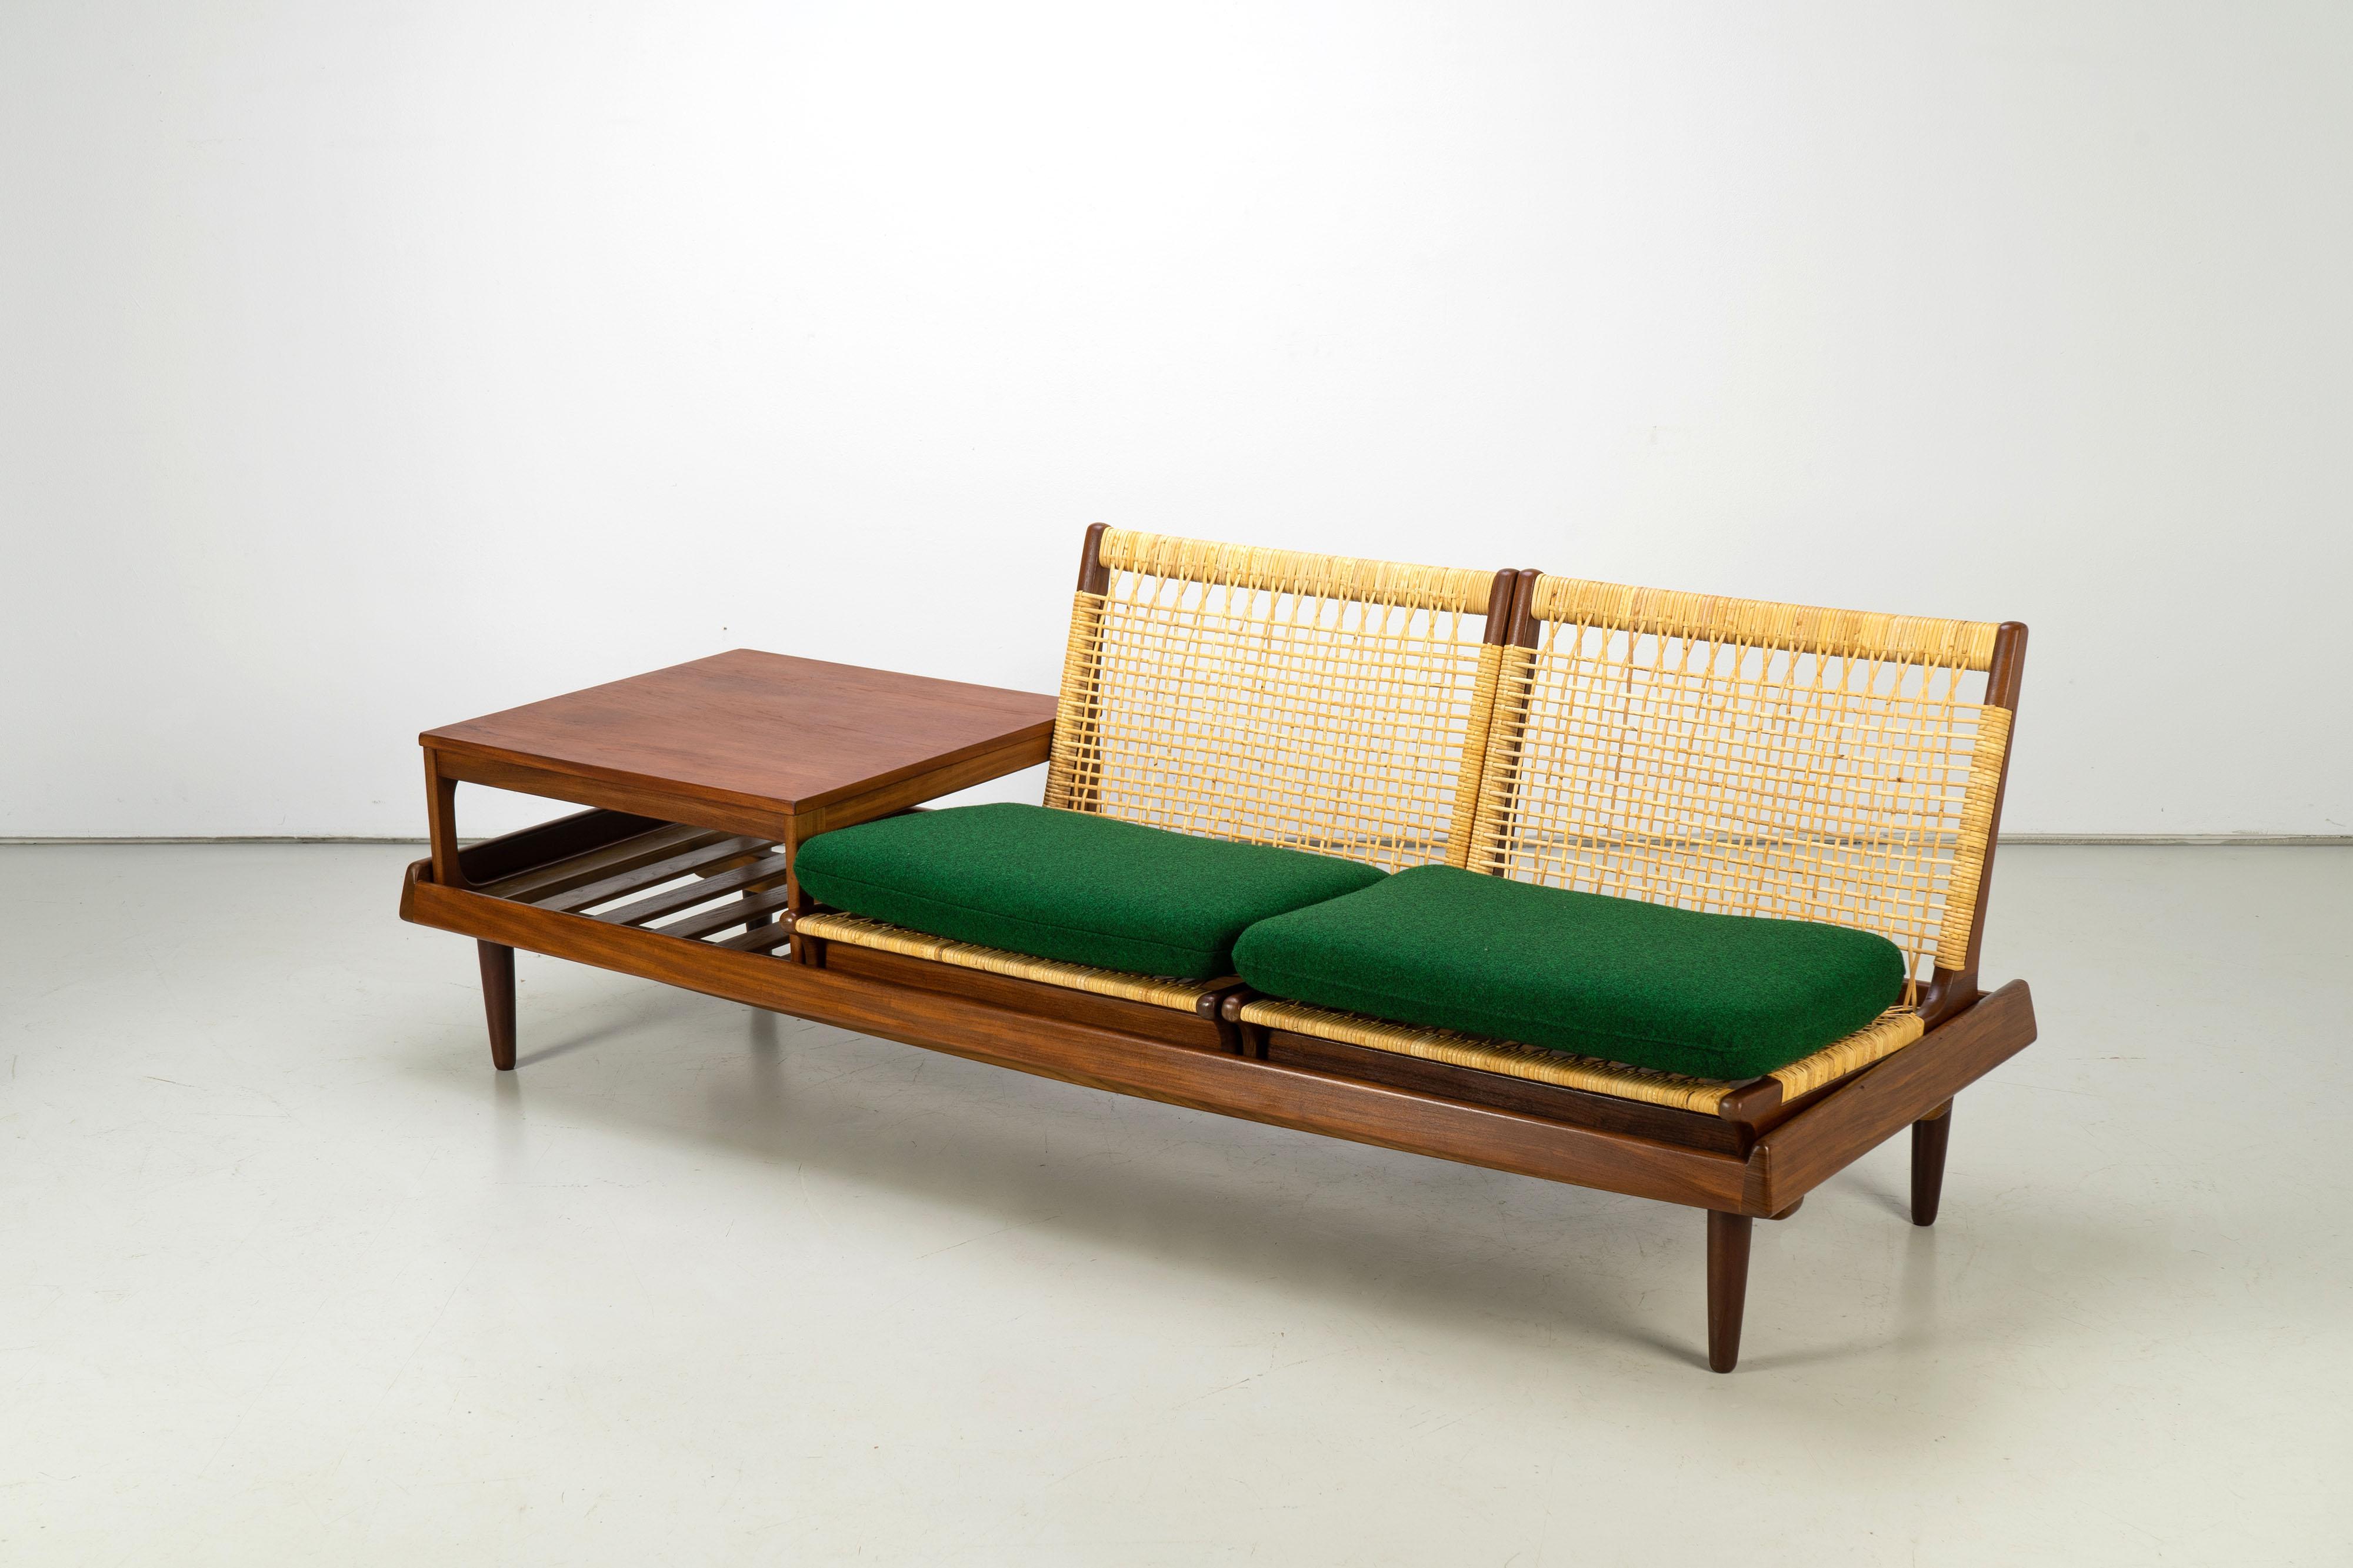 Modular teak TV bench model 161 by Hans Olsen for Bramin, Denmark. The set consists of a bench, two seating modules and a table. We have two full sets in stock that can be used as a corner combination.